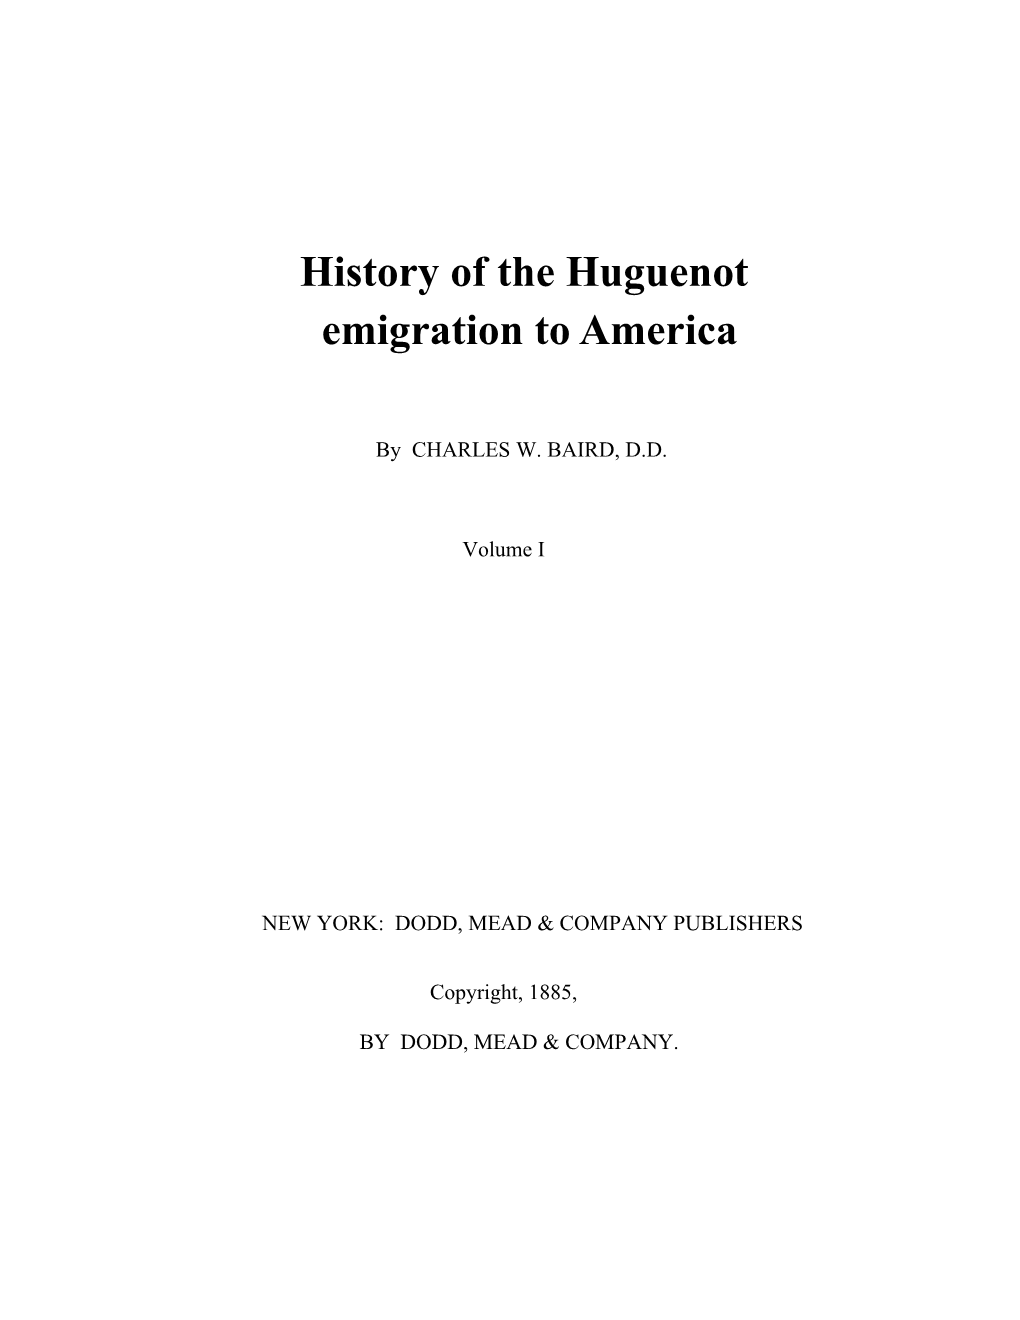 Full Text Of "History Of The Huguenot Emigration To America"